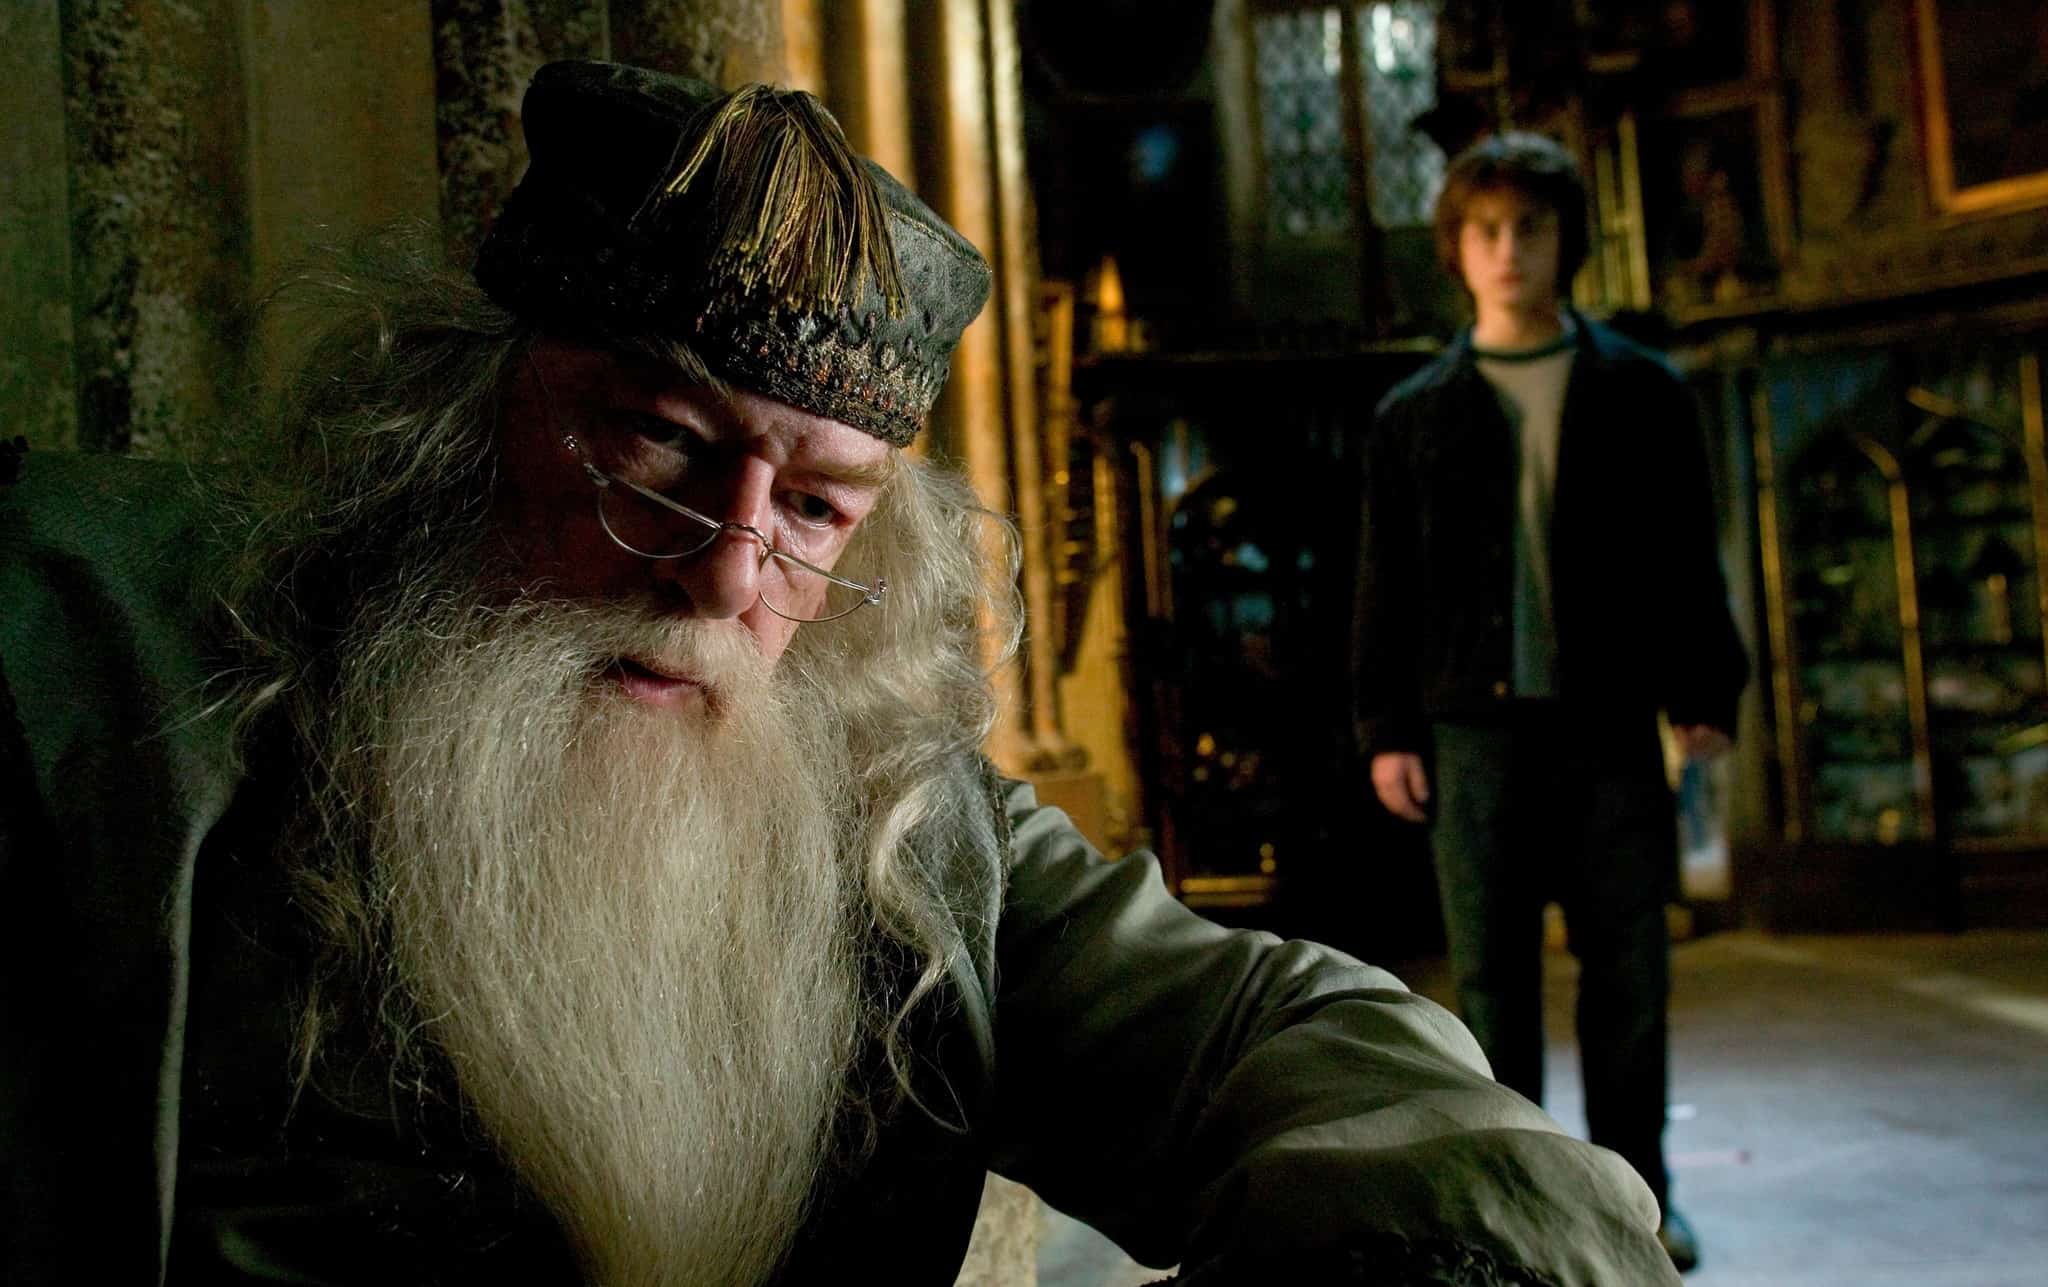 Michael Gambon and Daniel Radcliffe in this image from HBO Max